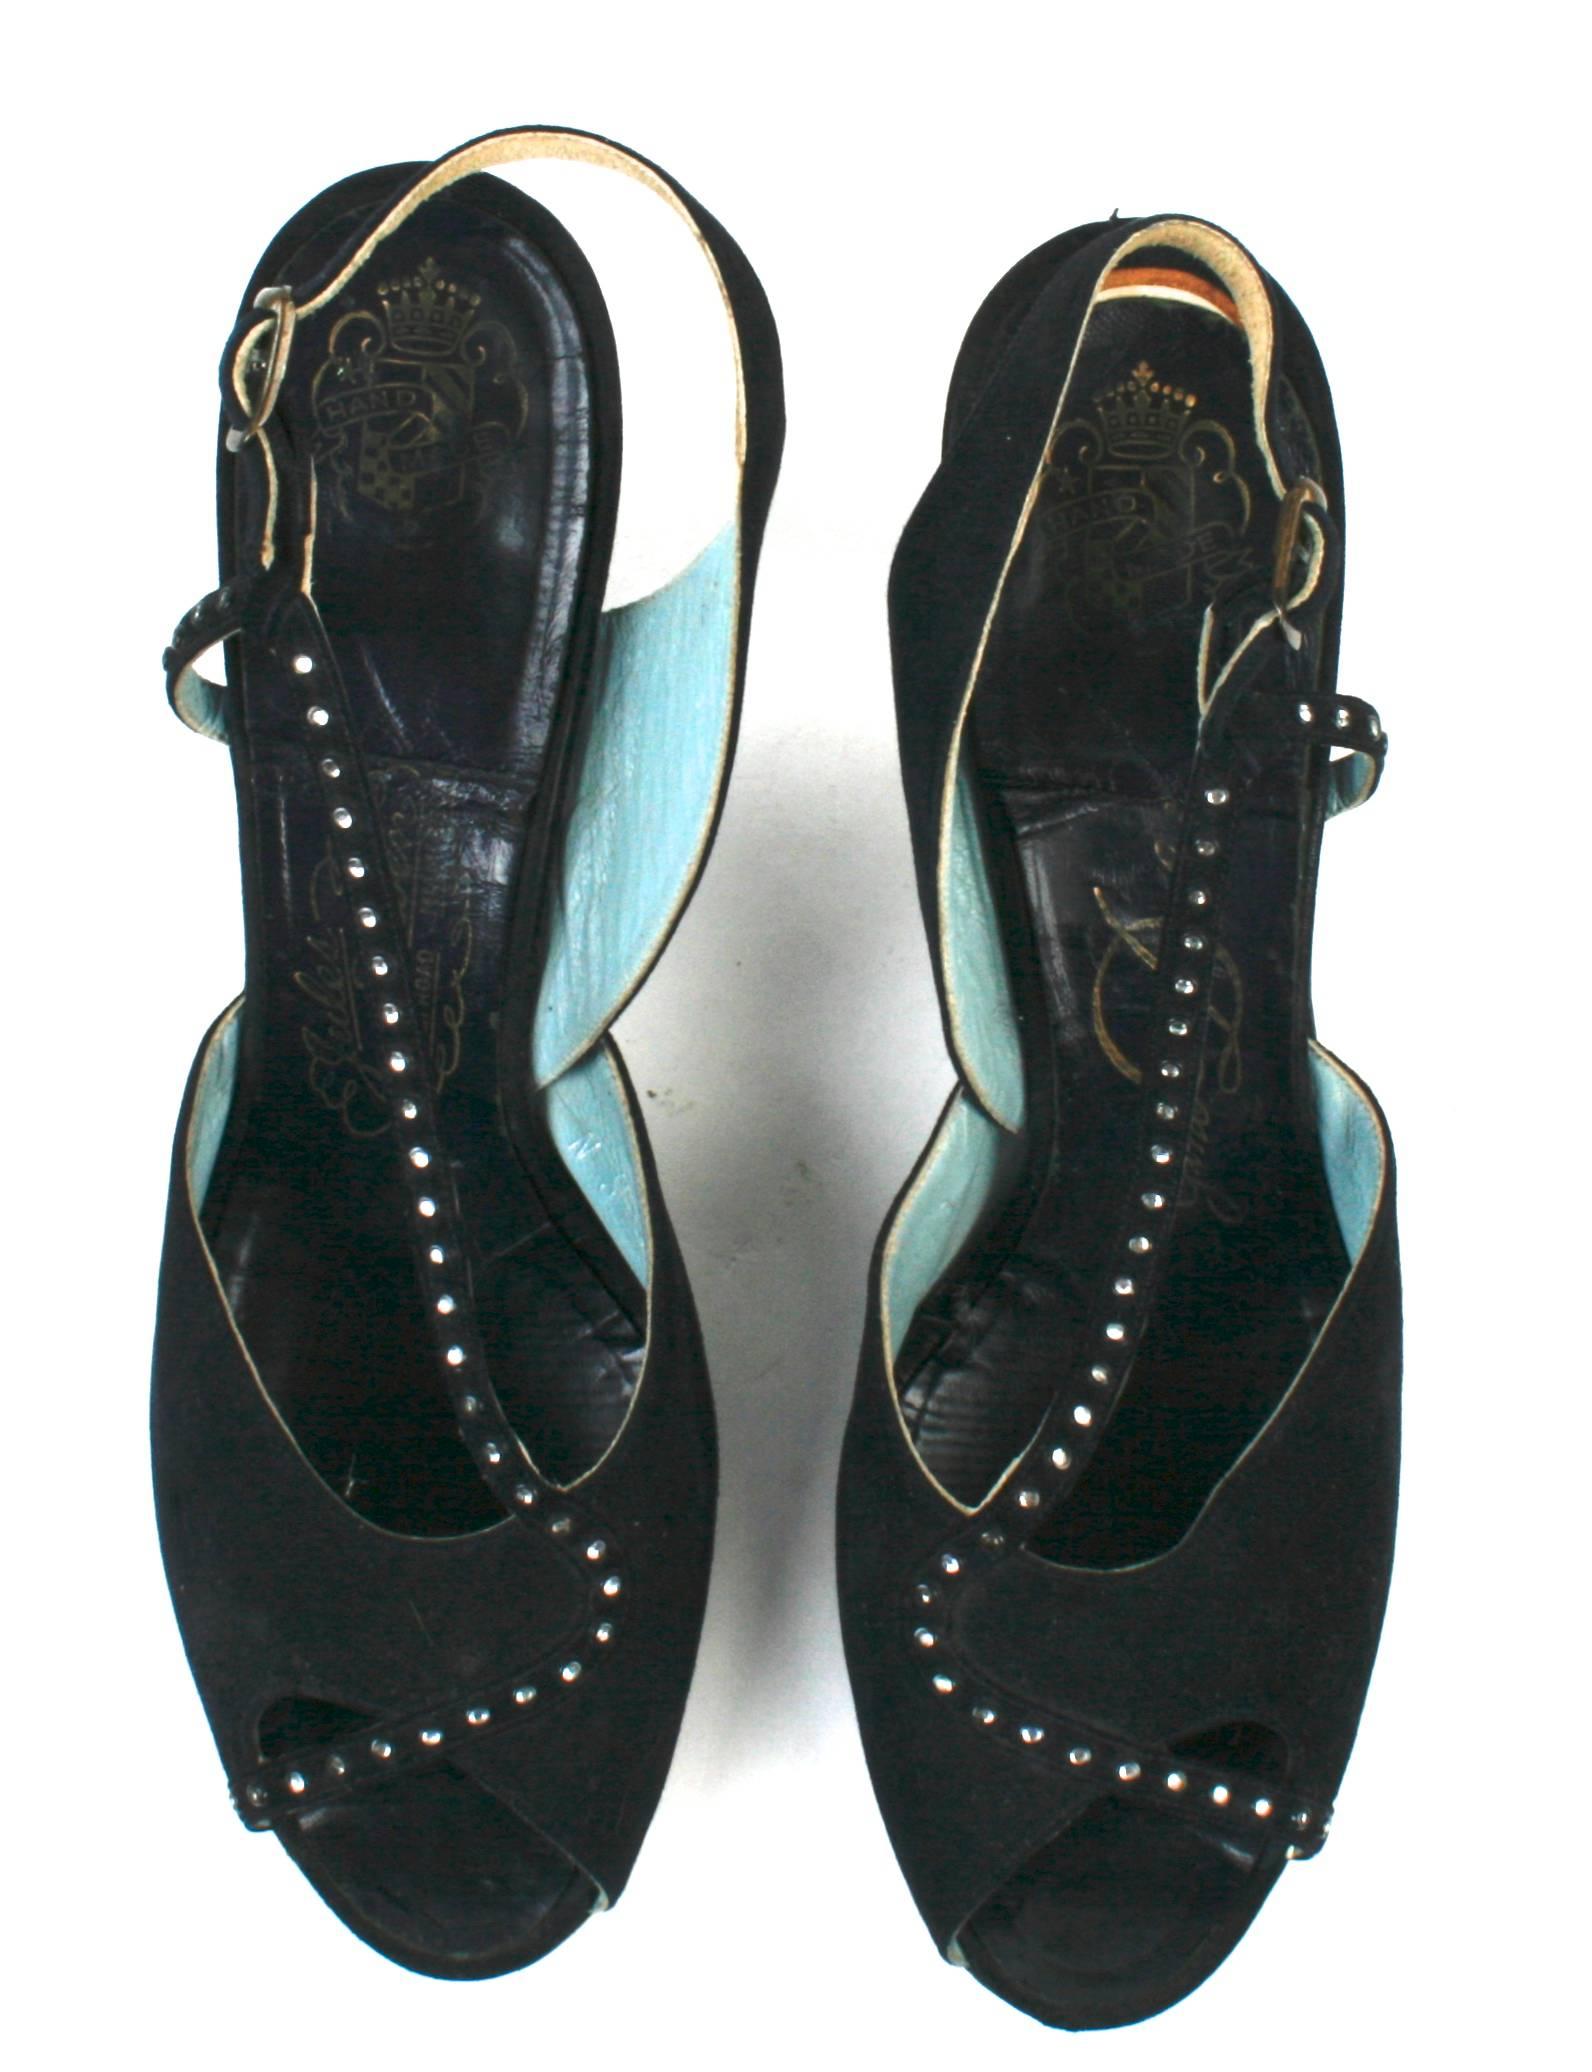 Handmade Jules Schoen Peep Toe Black Suede Pumps with Glass Rhinestone Trim In Good Condition For Sale In valatie, NY